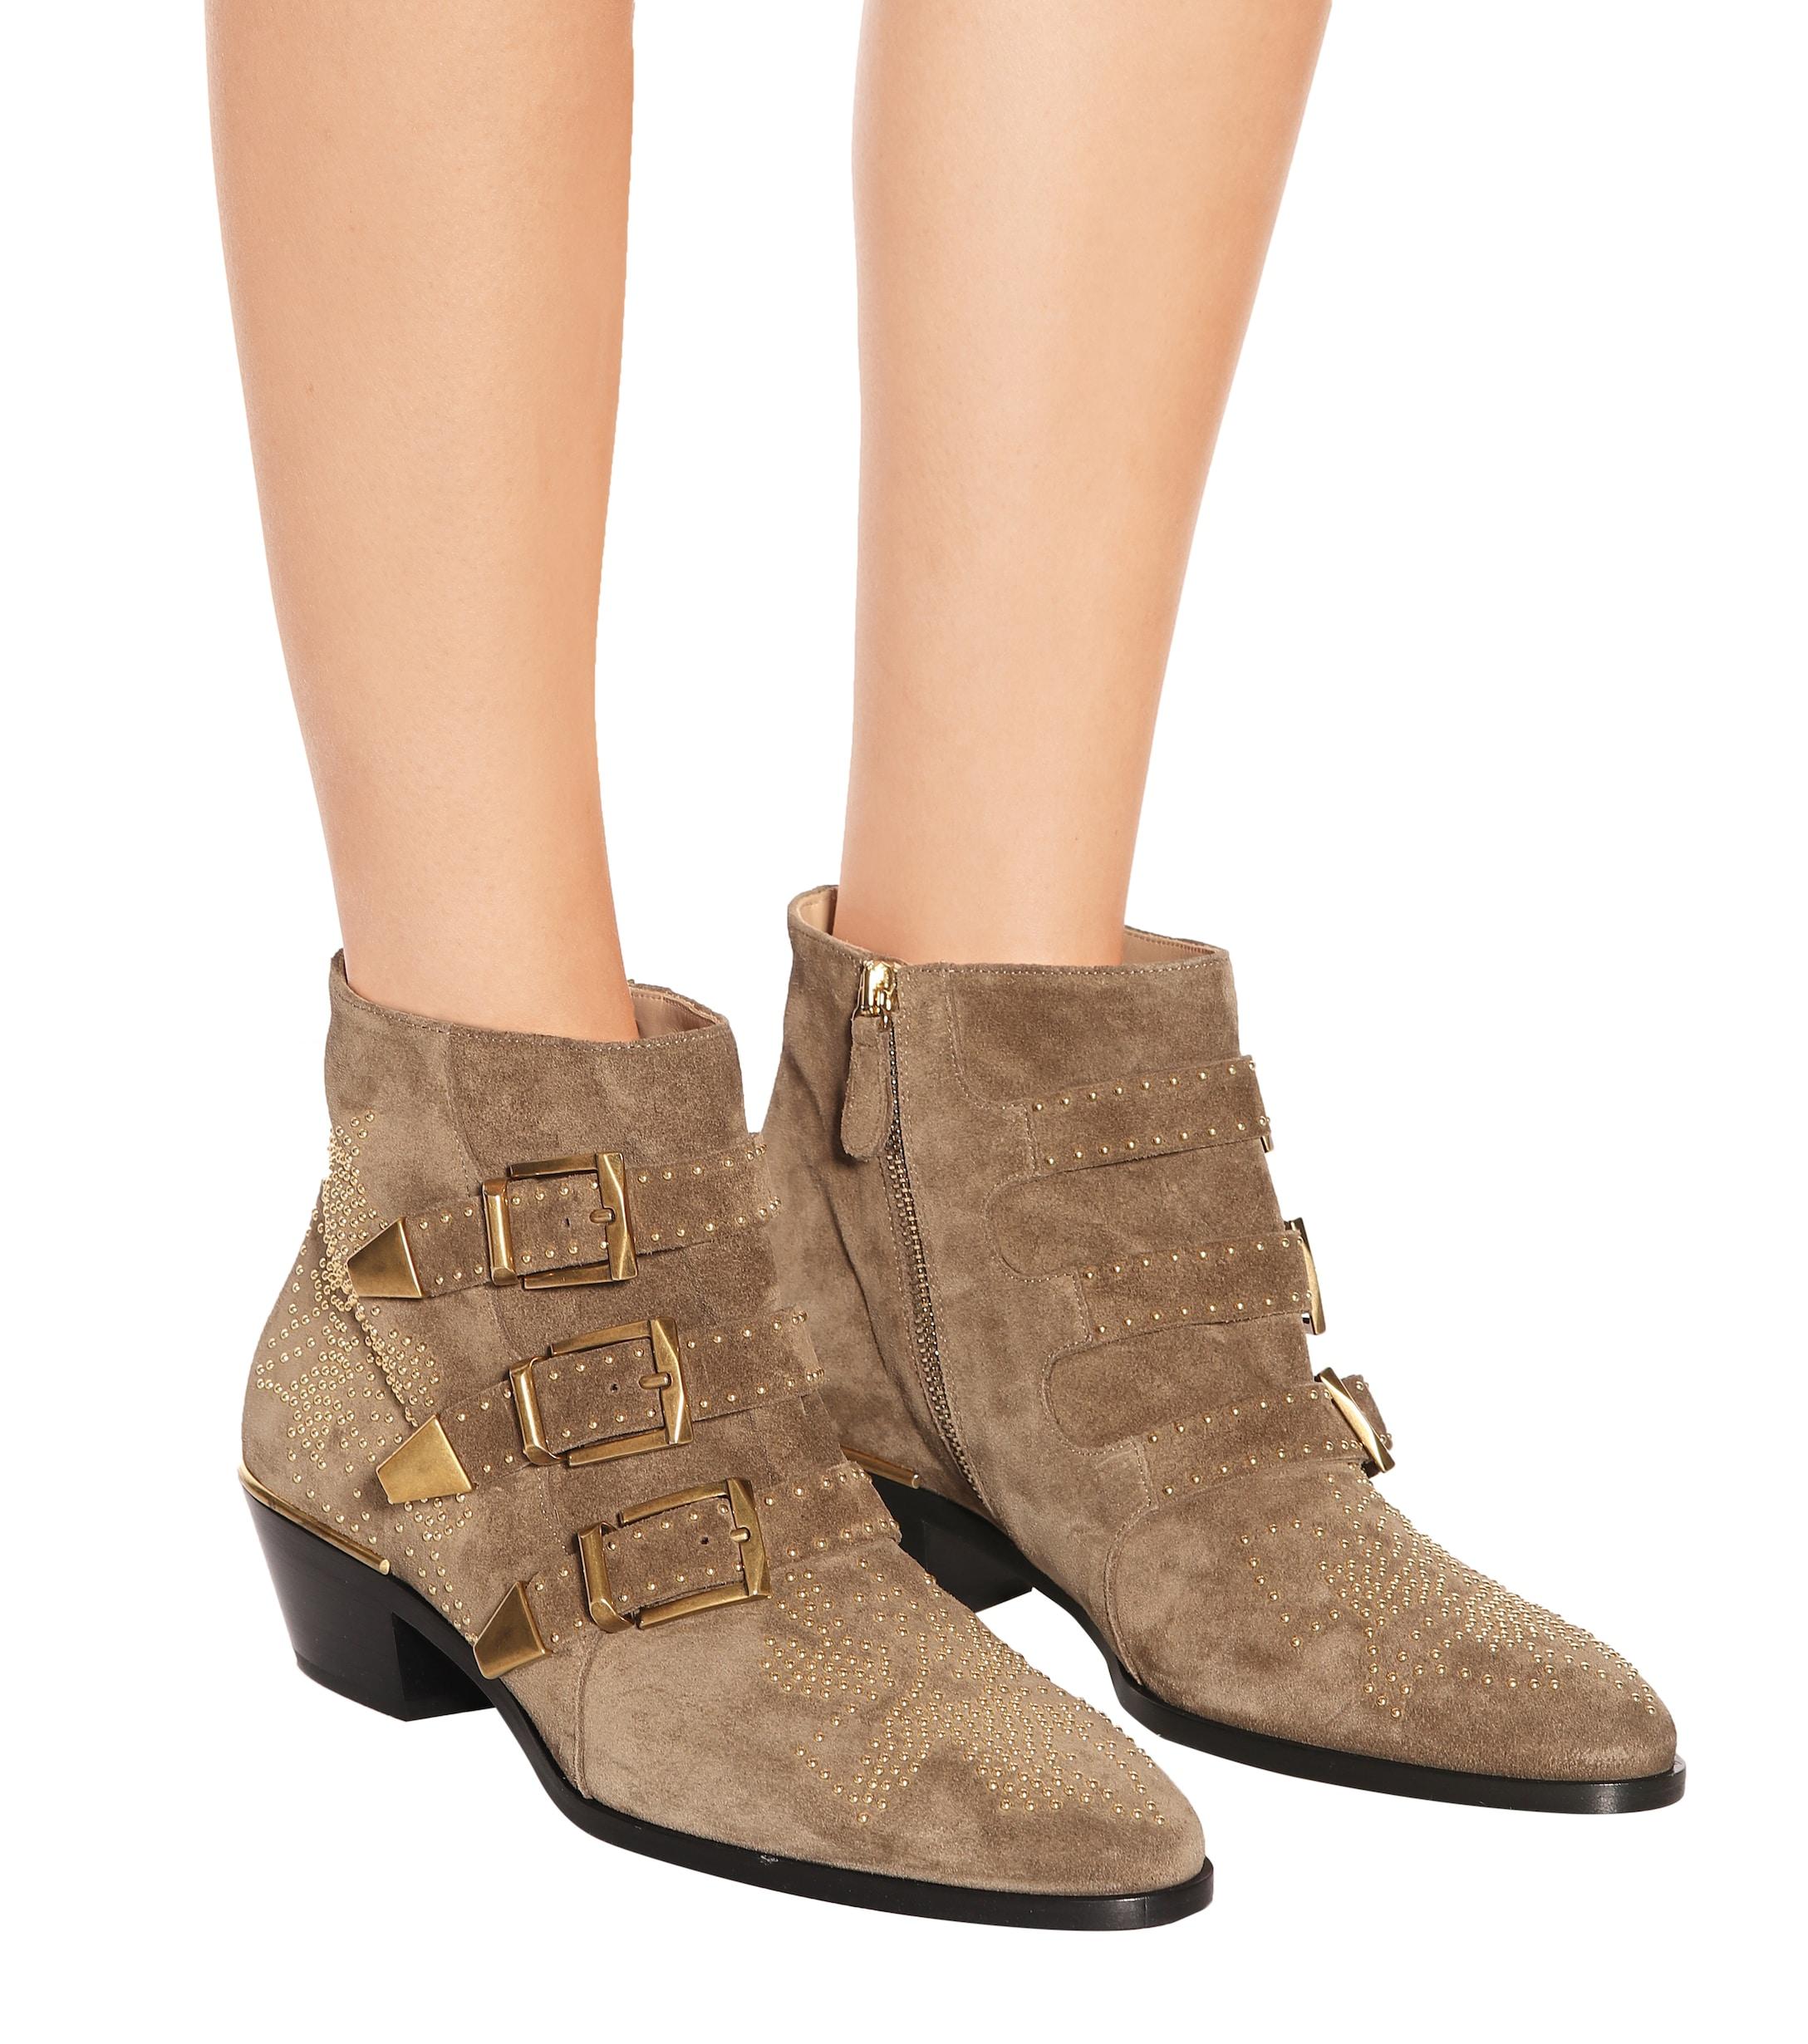 Chloé Susanna Studded Suede Ankle Boots in Grey (Brown) - Lyst